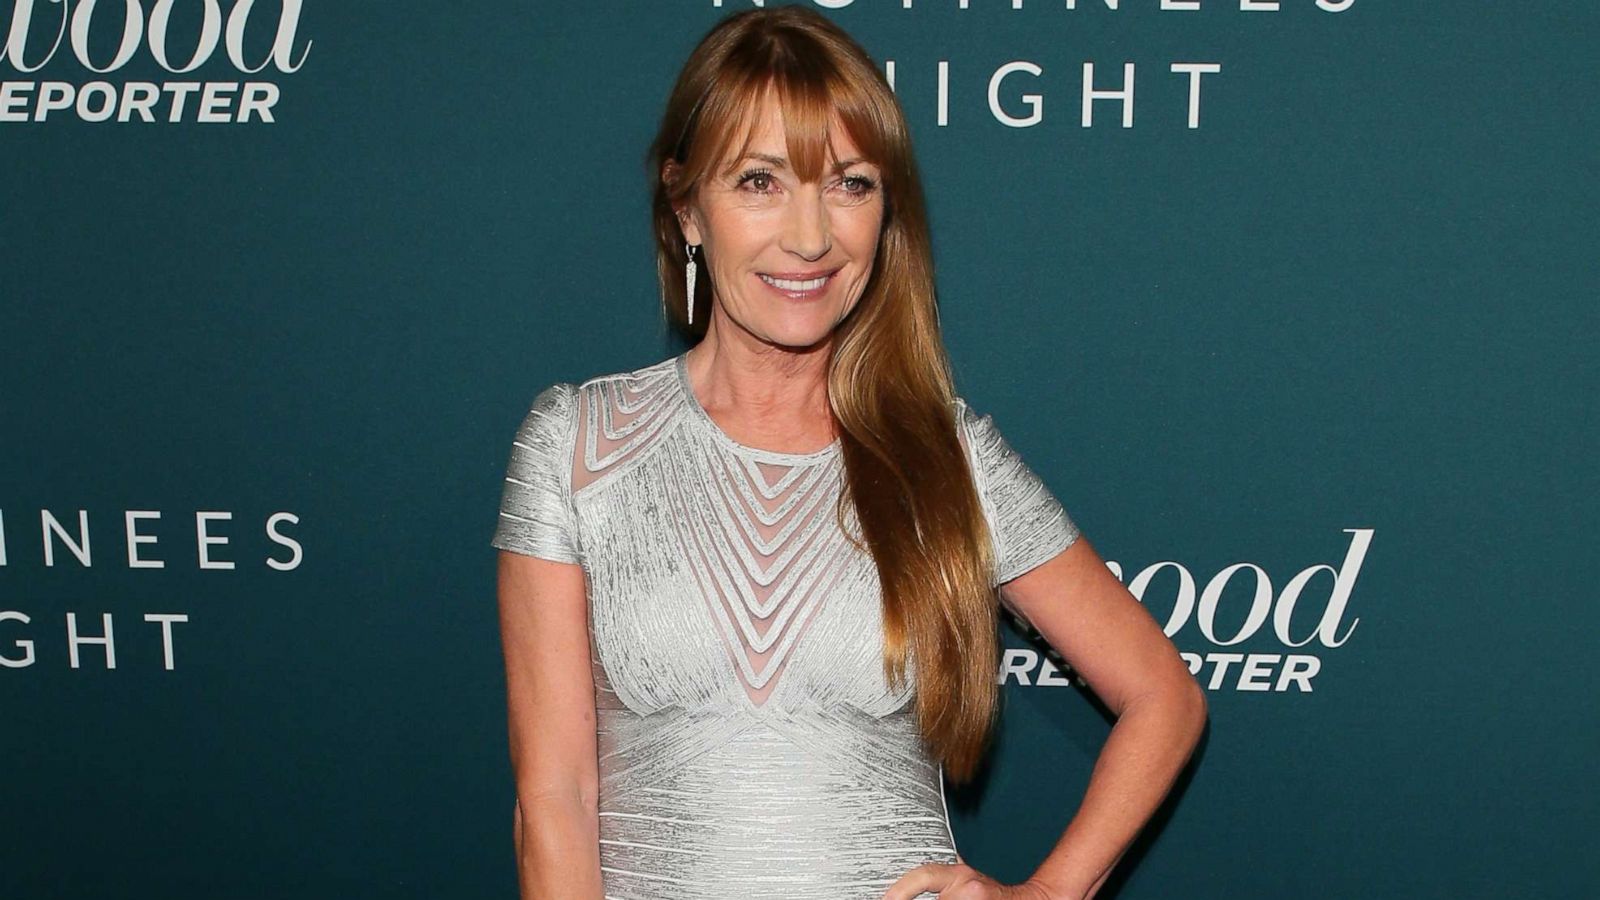 Why Jane Seymour is posing for Playboy at 67 - Good Morning America